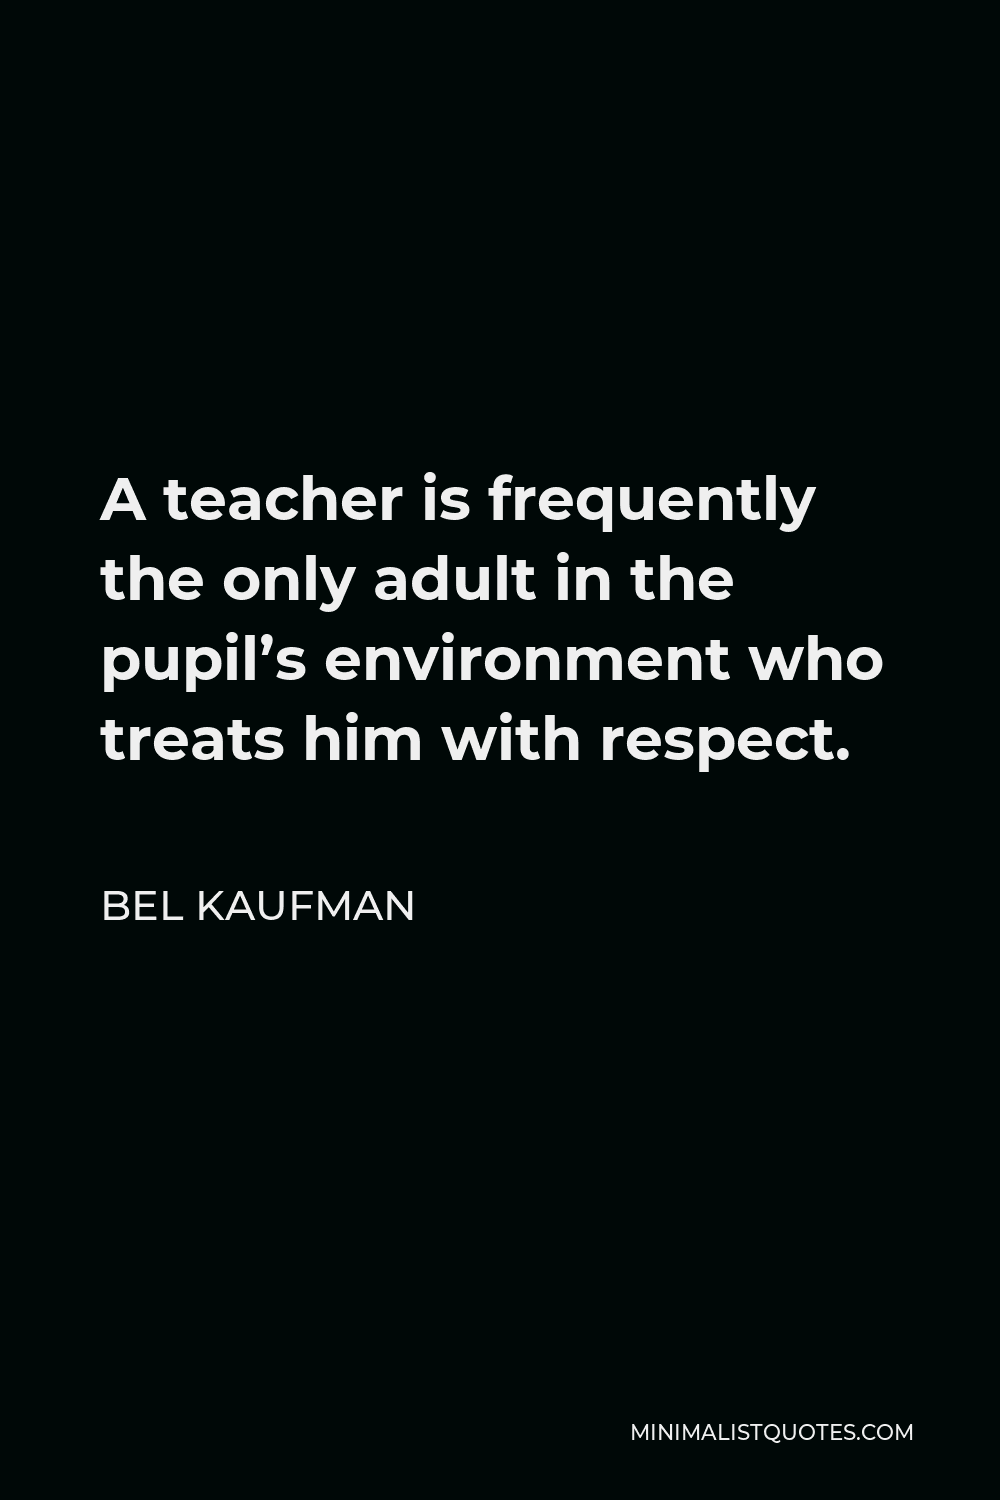 Bel Kaufman Quote - A teacher is frequently the only adult in the pupil’s environment who treats him with respect.